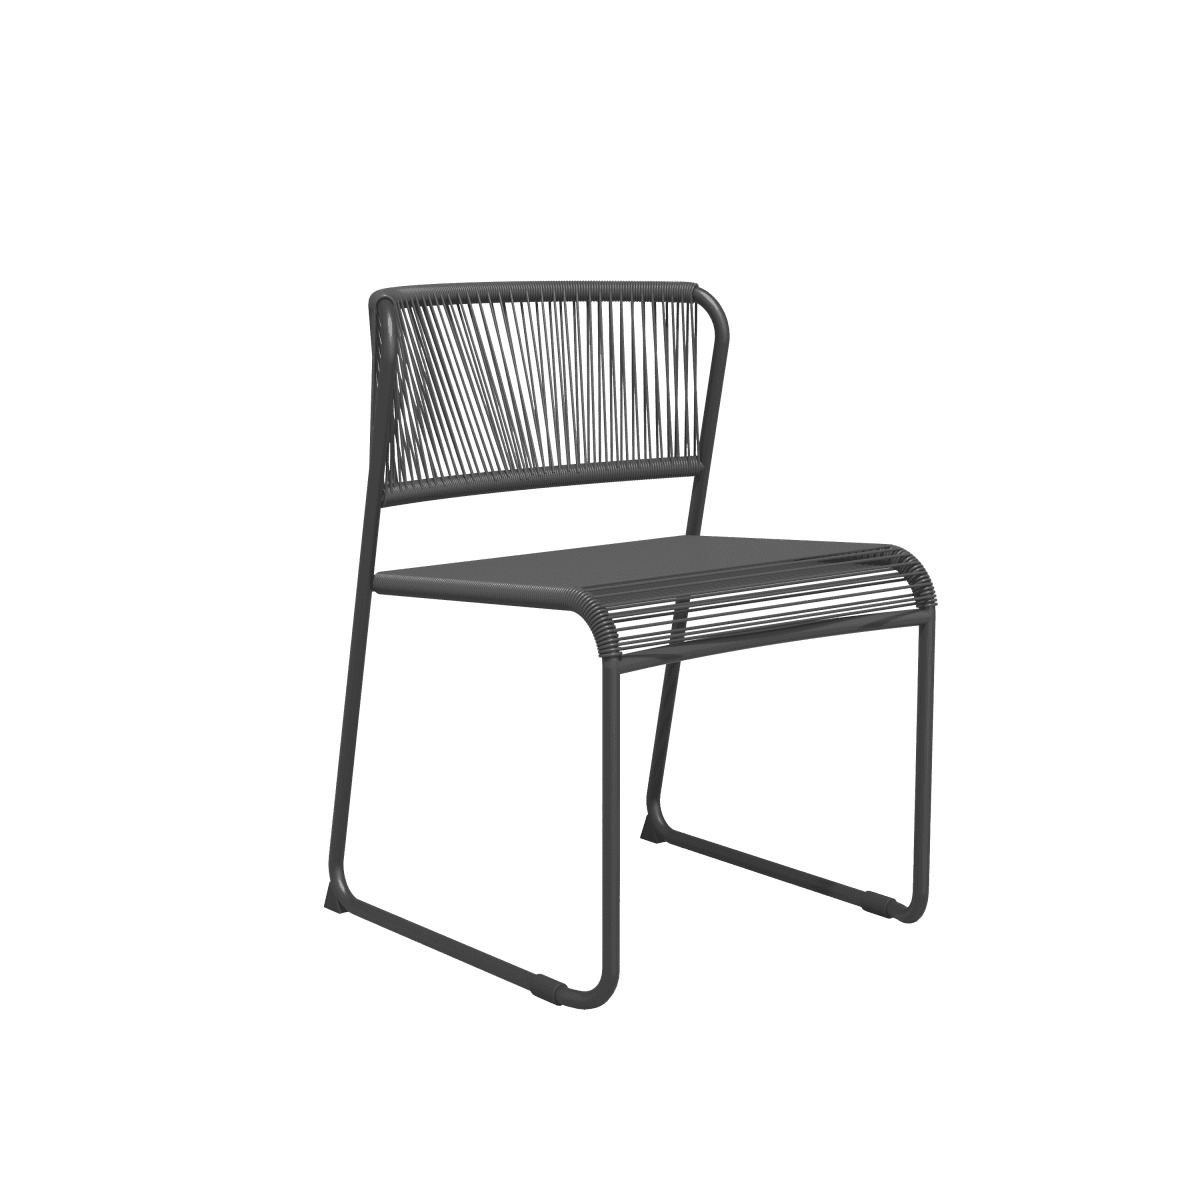 ARMCHAIR DUO NATERIAL Steel and wicker 50X59X71.5H cm anthracite